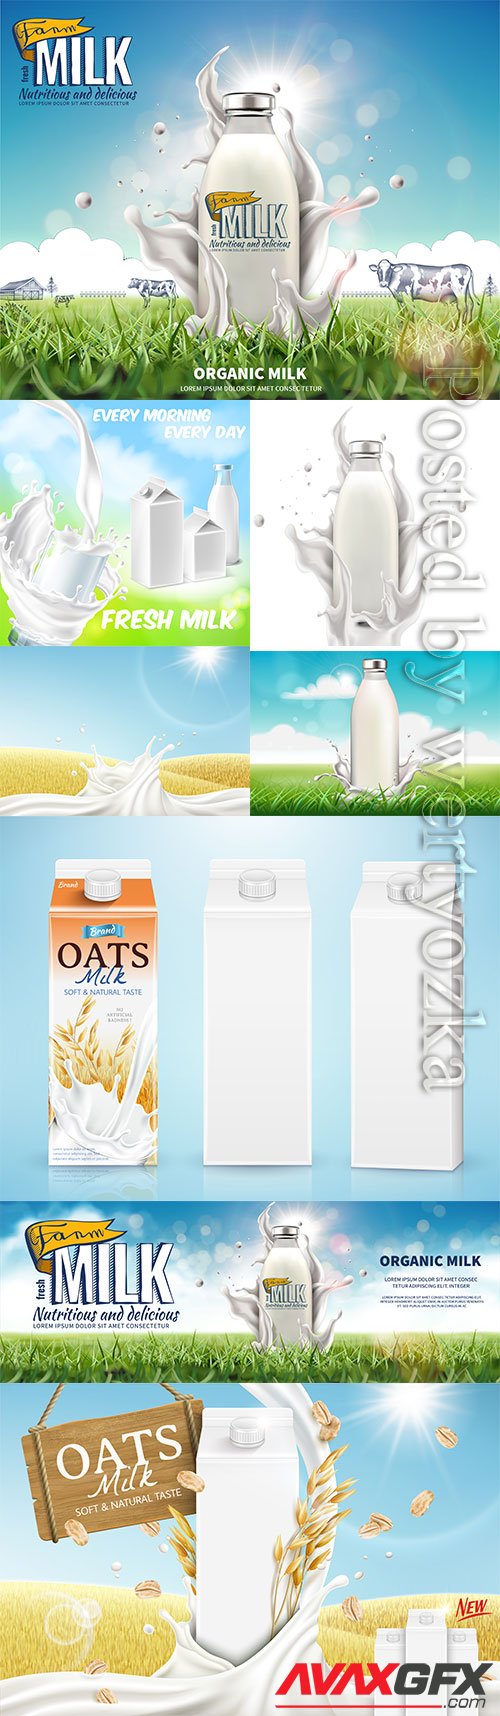 Milk banner with swirling liquid and blank carton box on golden grain field in 3d illustration